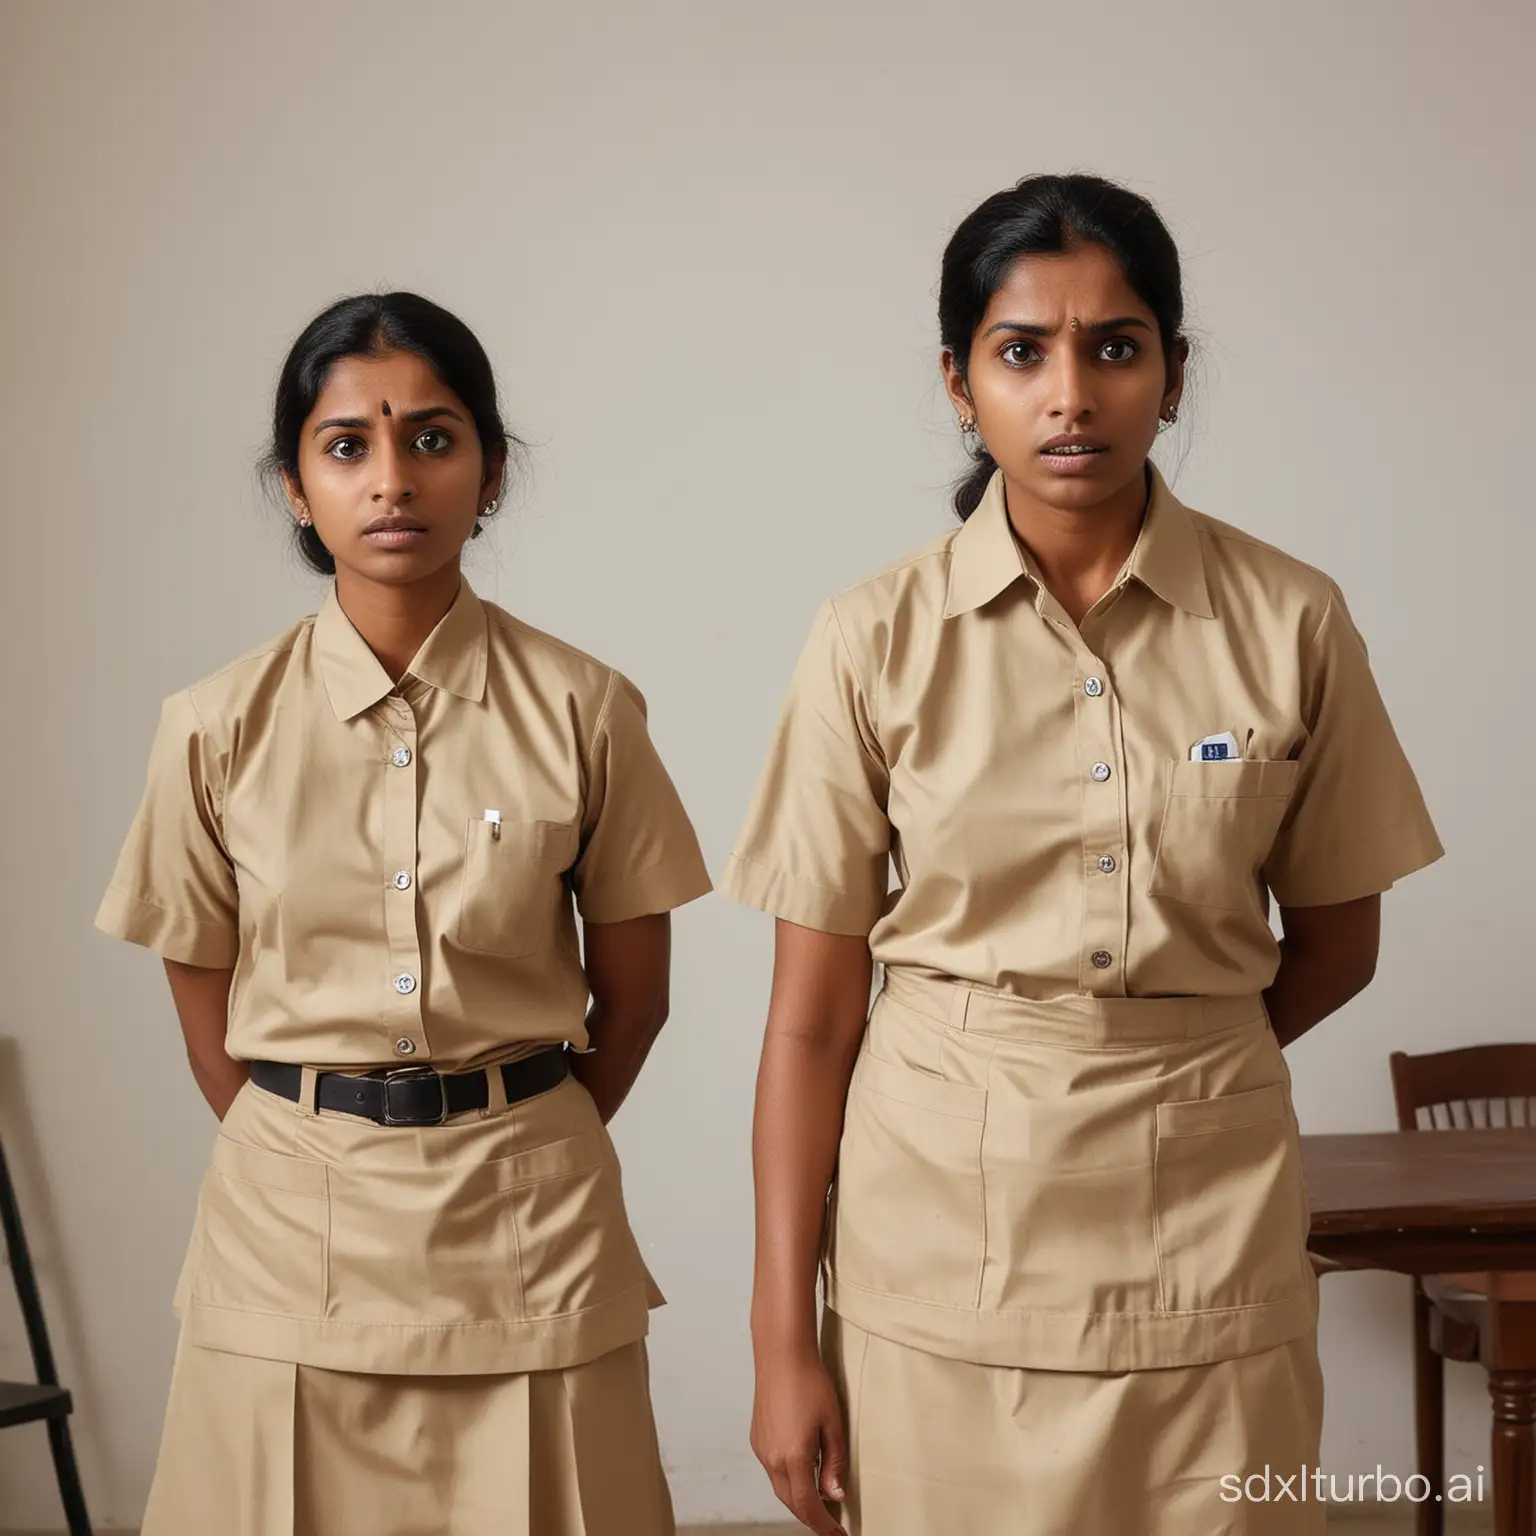 Indian-Housekeepers-in-Uniform-Expressing-Shock